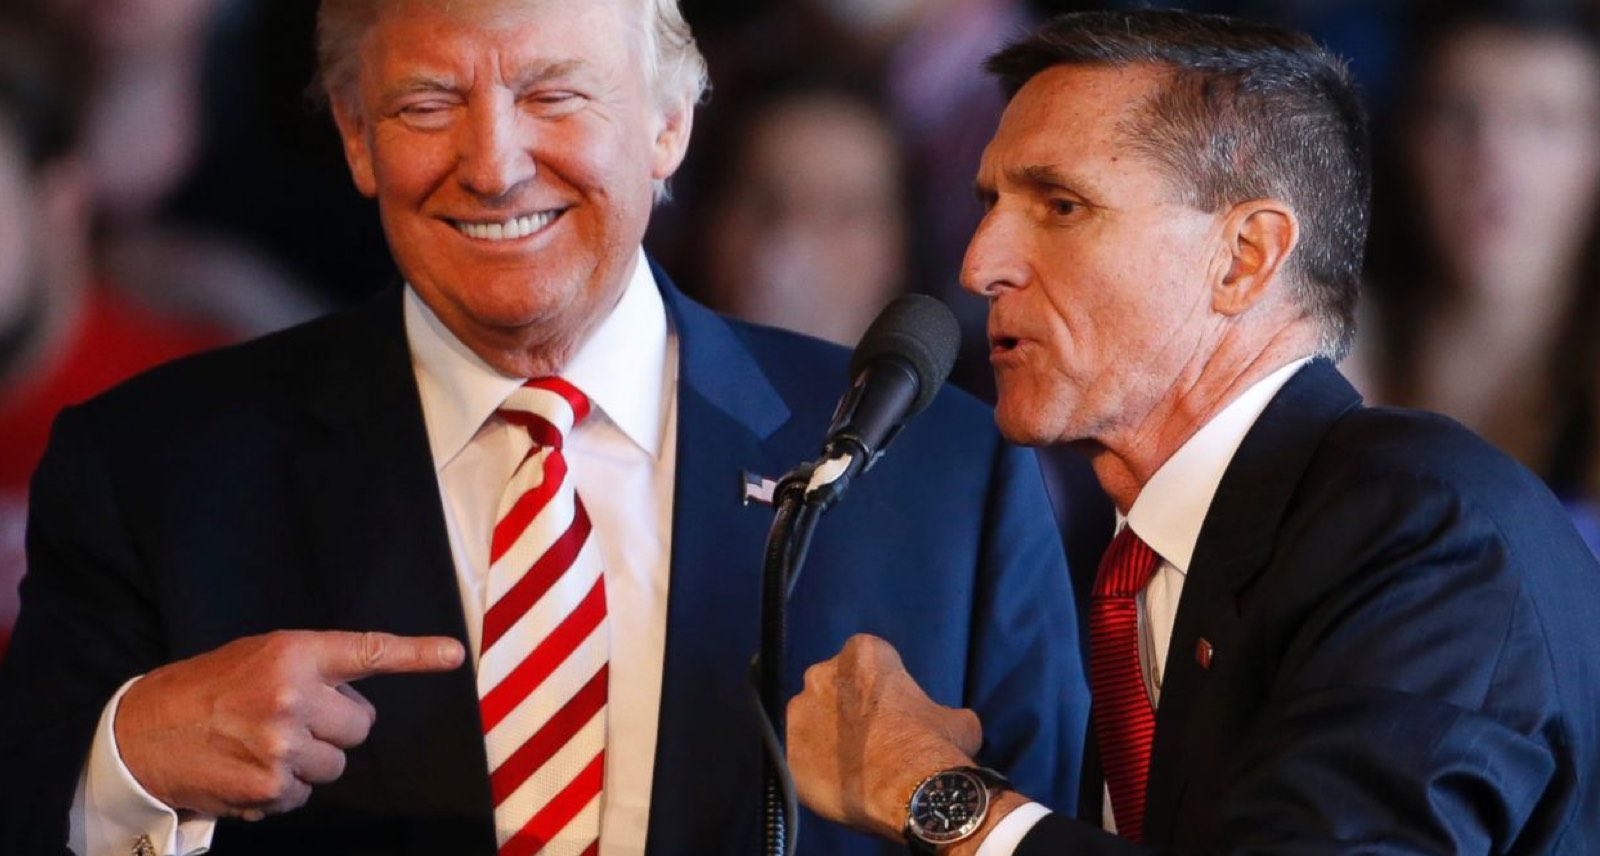 Donald Trump on stage with Michael Flynn at a campaign rally in 2016